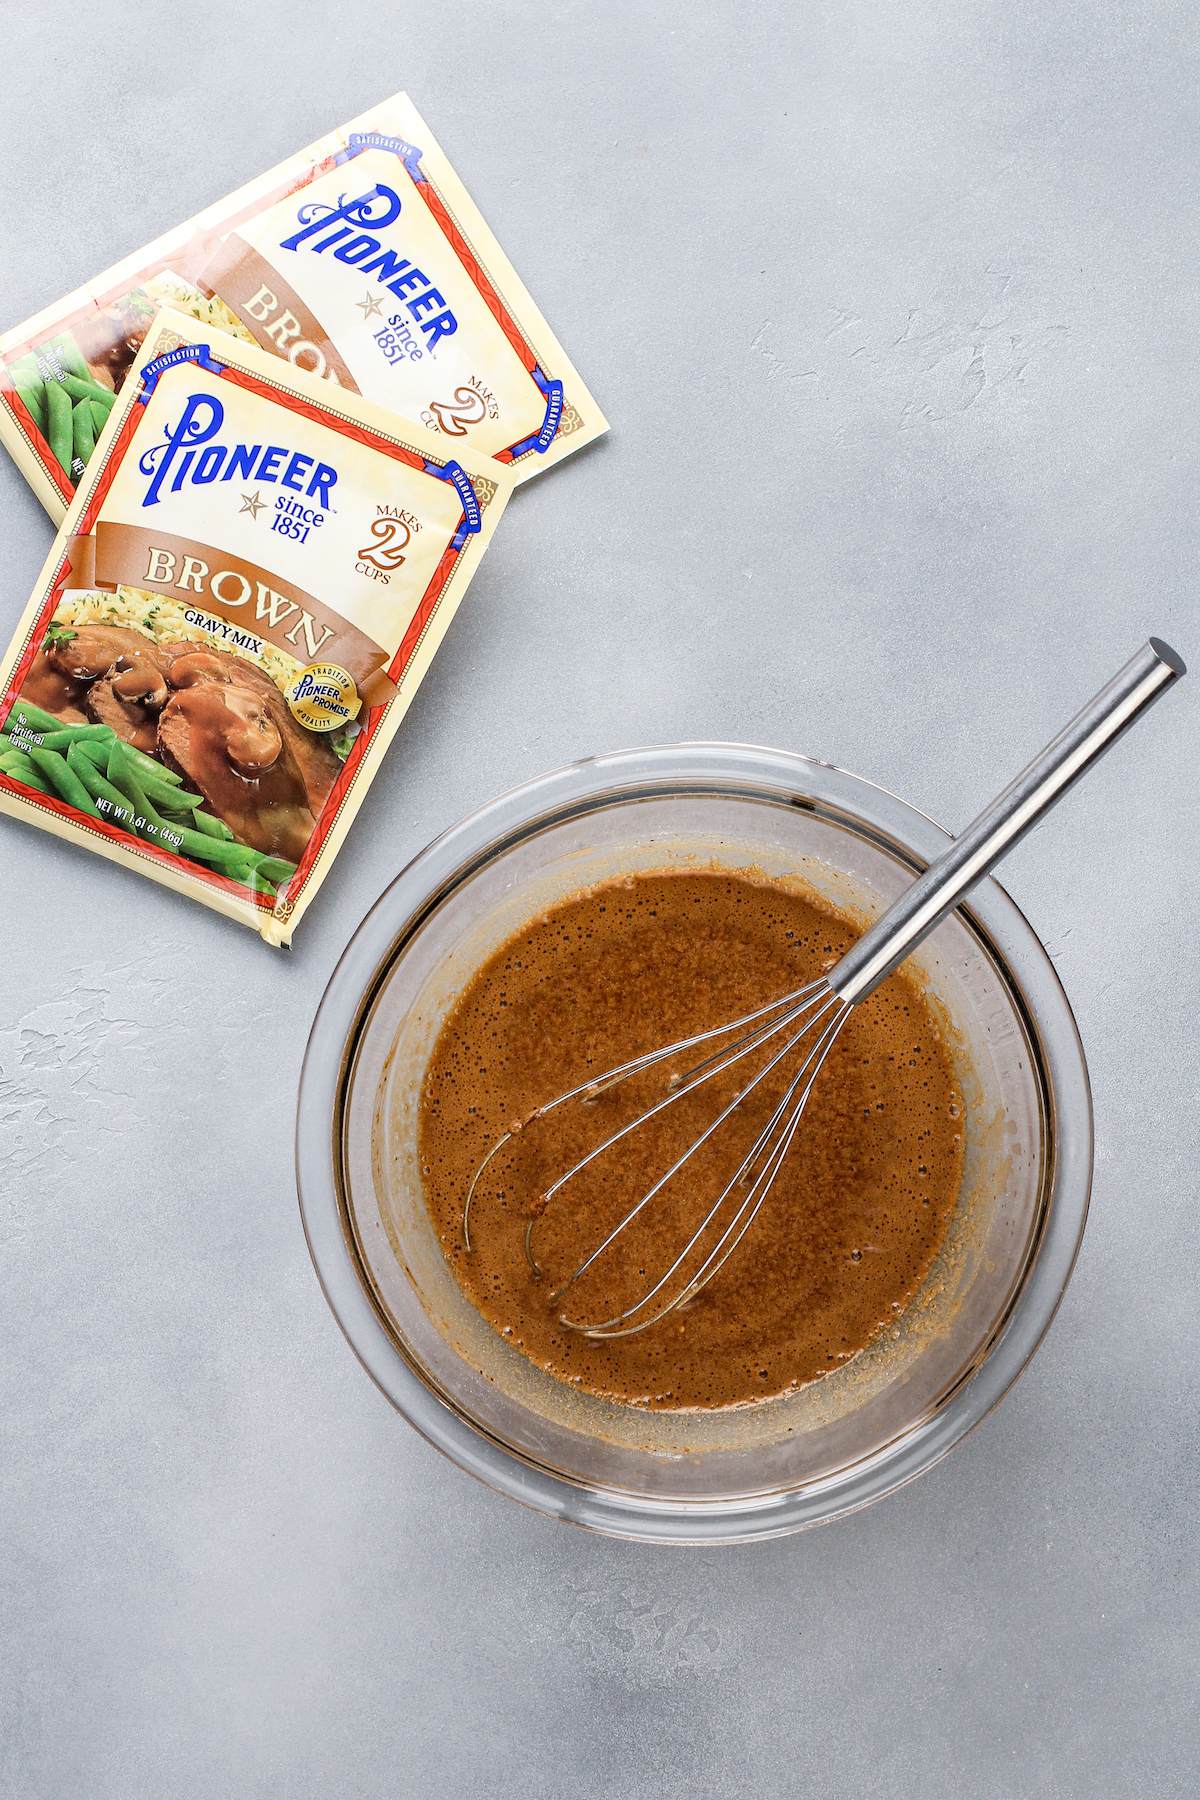 A bowl with beer and brown gravy whisked together and two packets of Pioneer brown gravy mix.